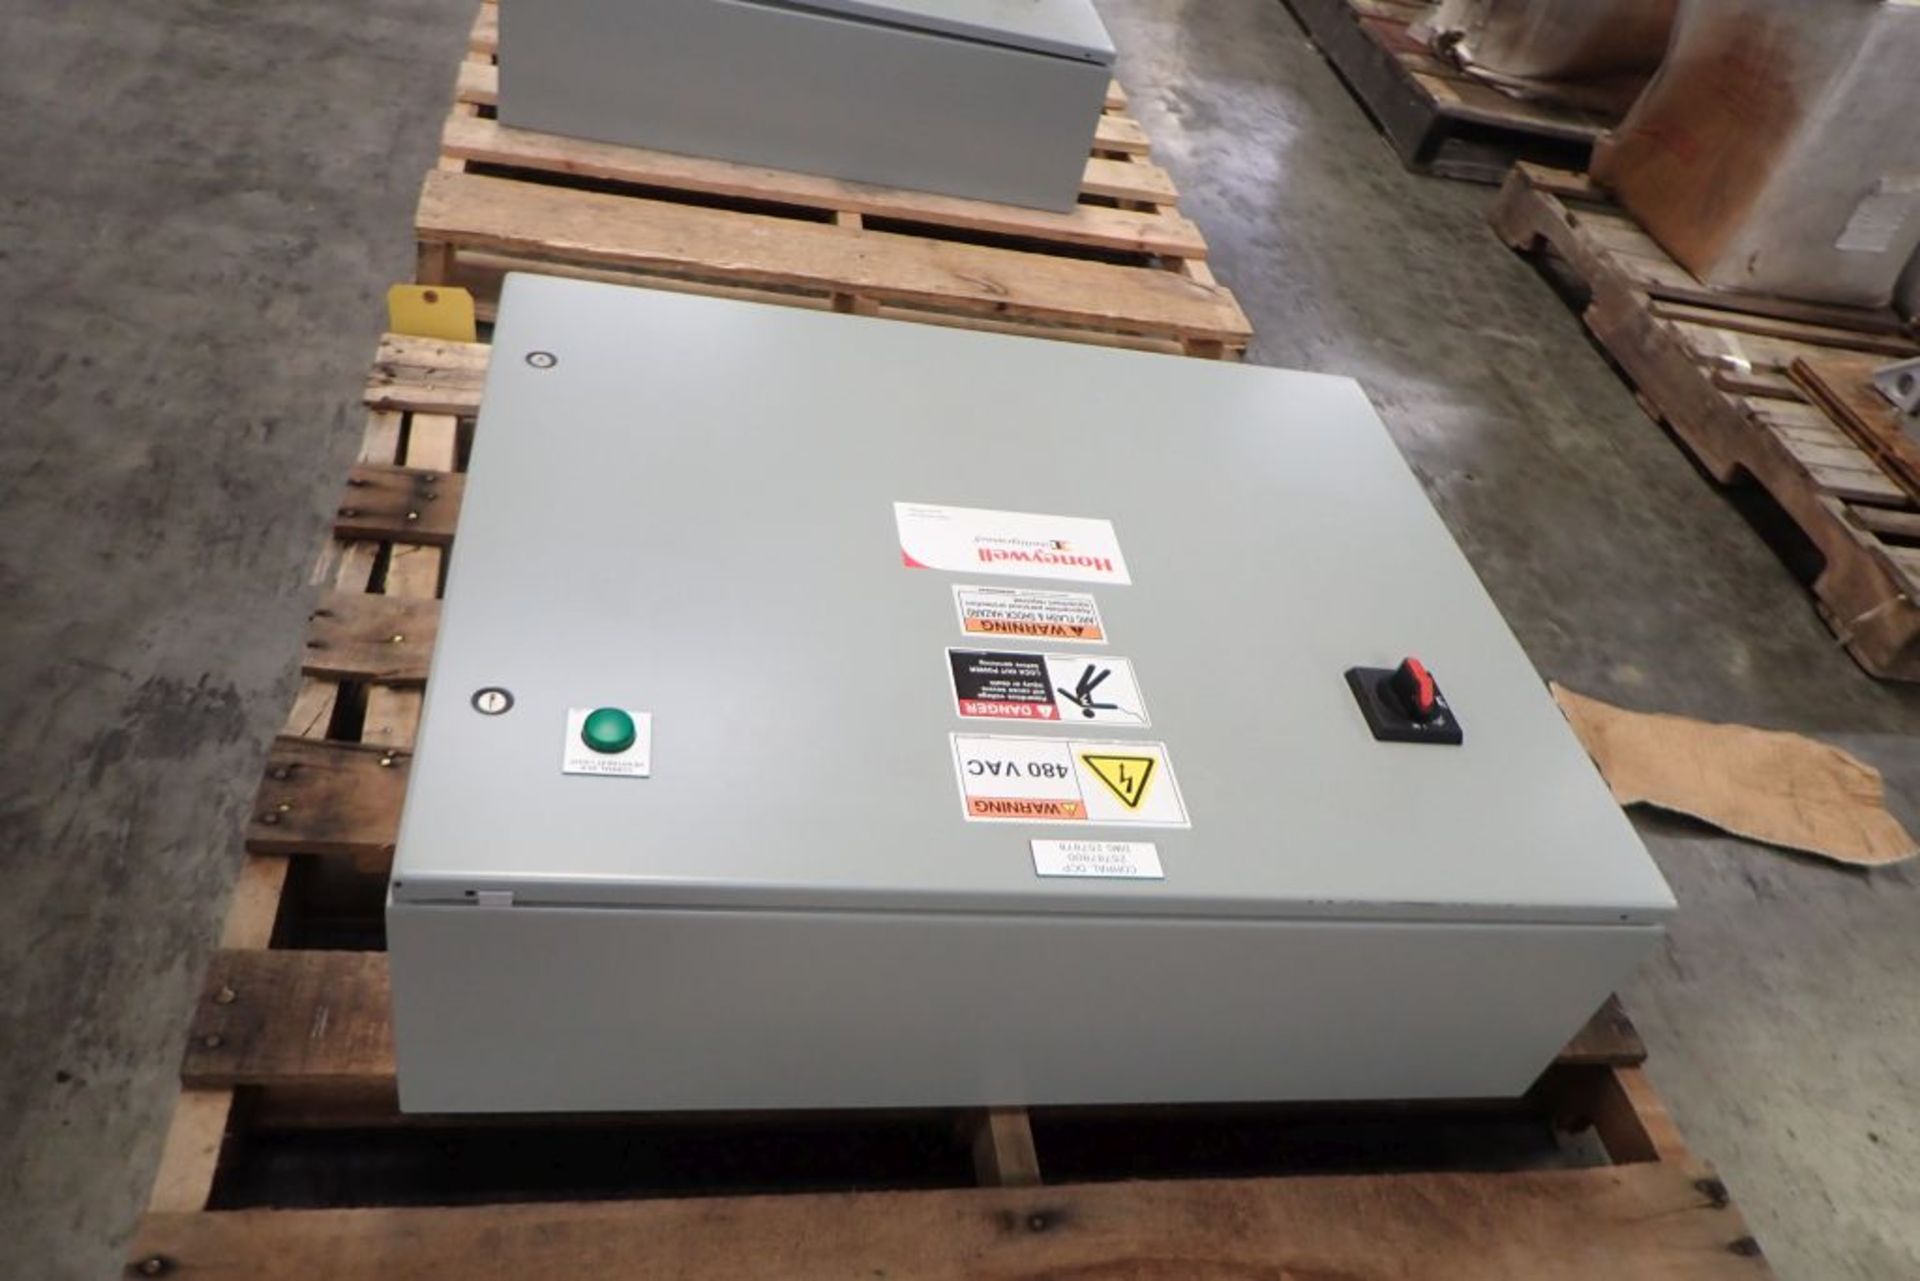 Hoffman Nvent Industrial Control Panel Enclosure with Contents - Image 3 of 6